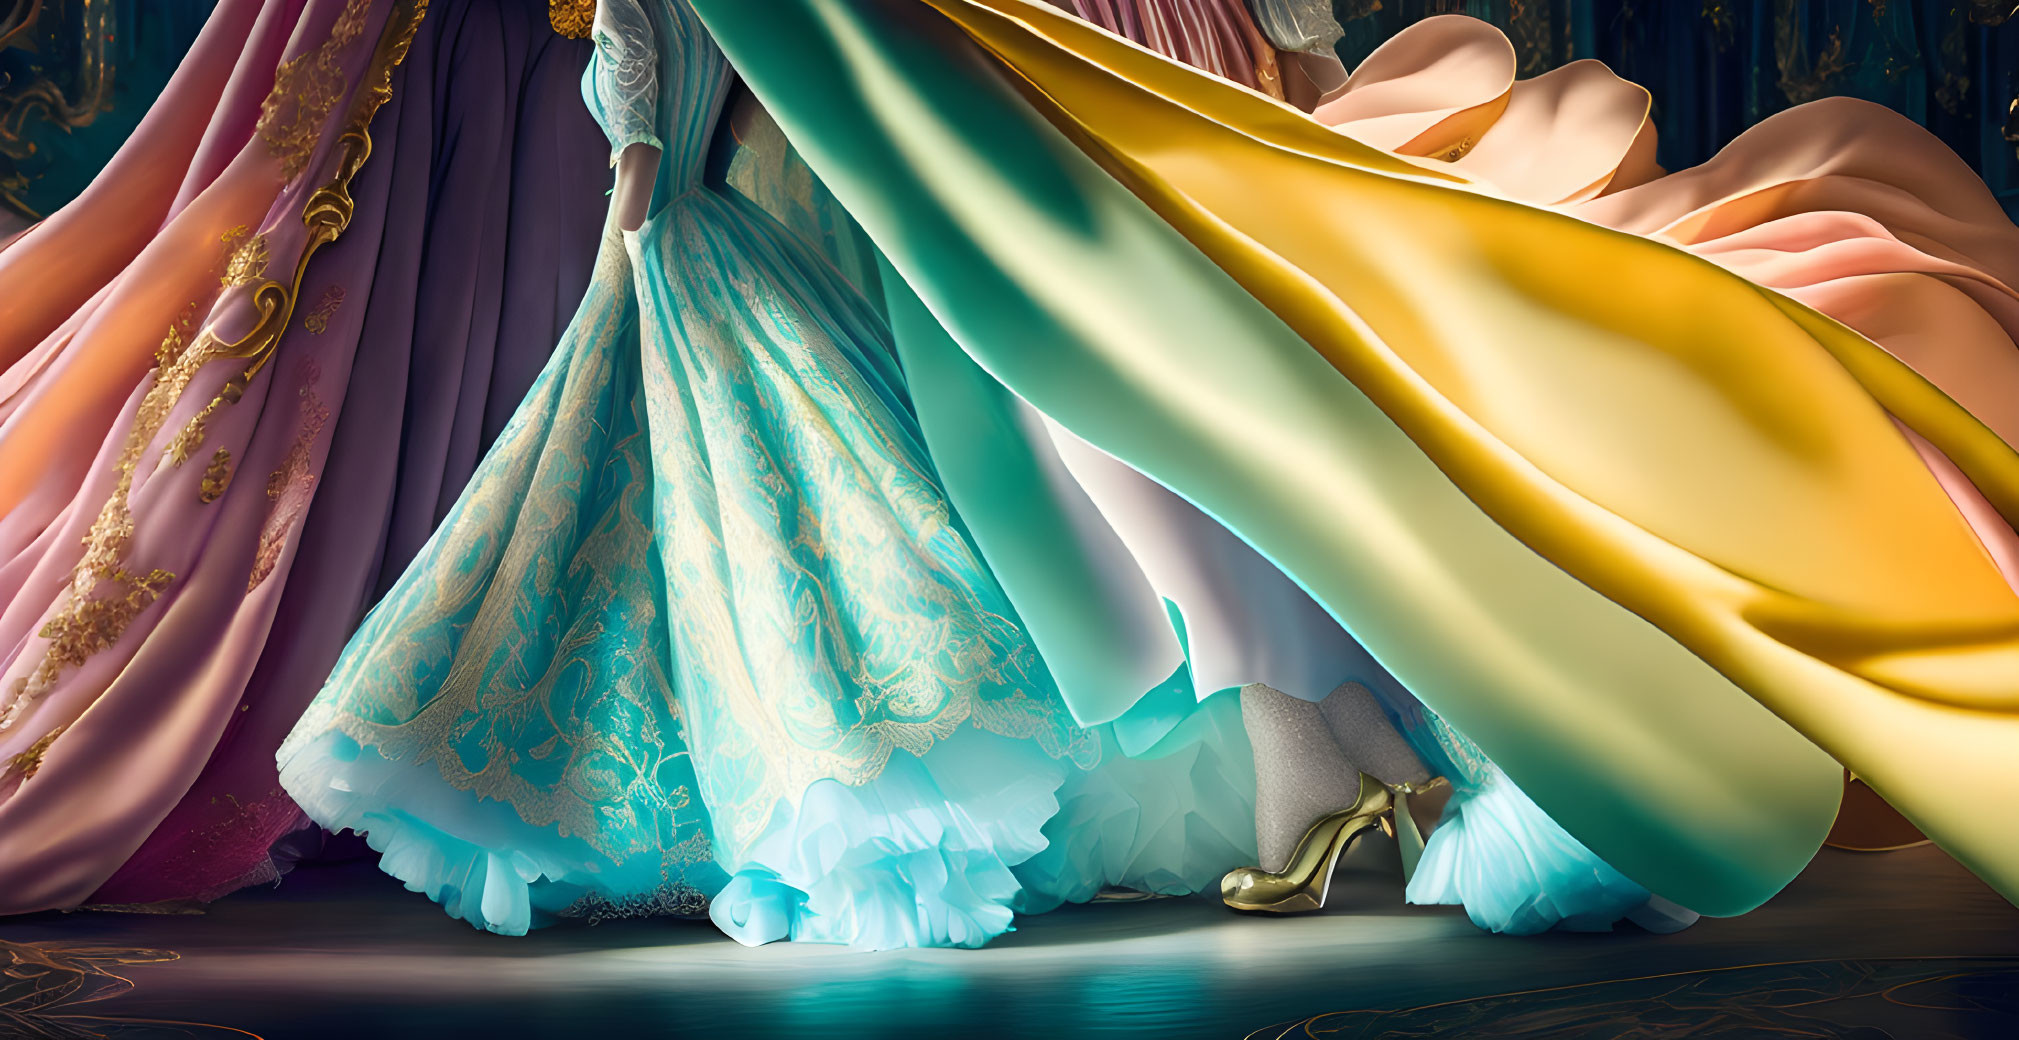 Colorful Ball Gowns Illustration with Shoe Detail